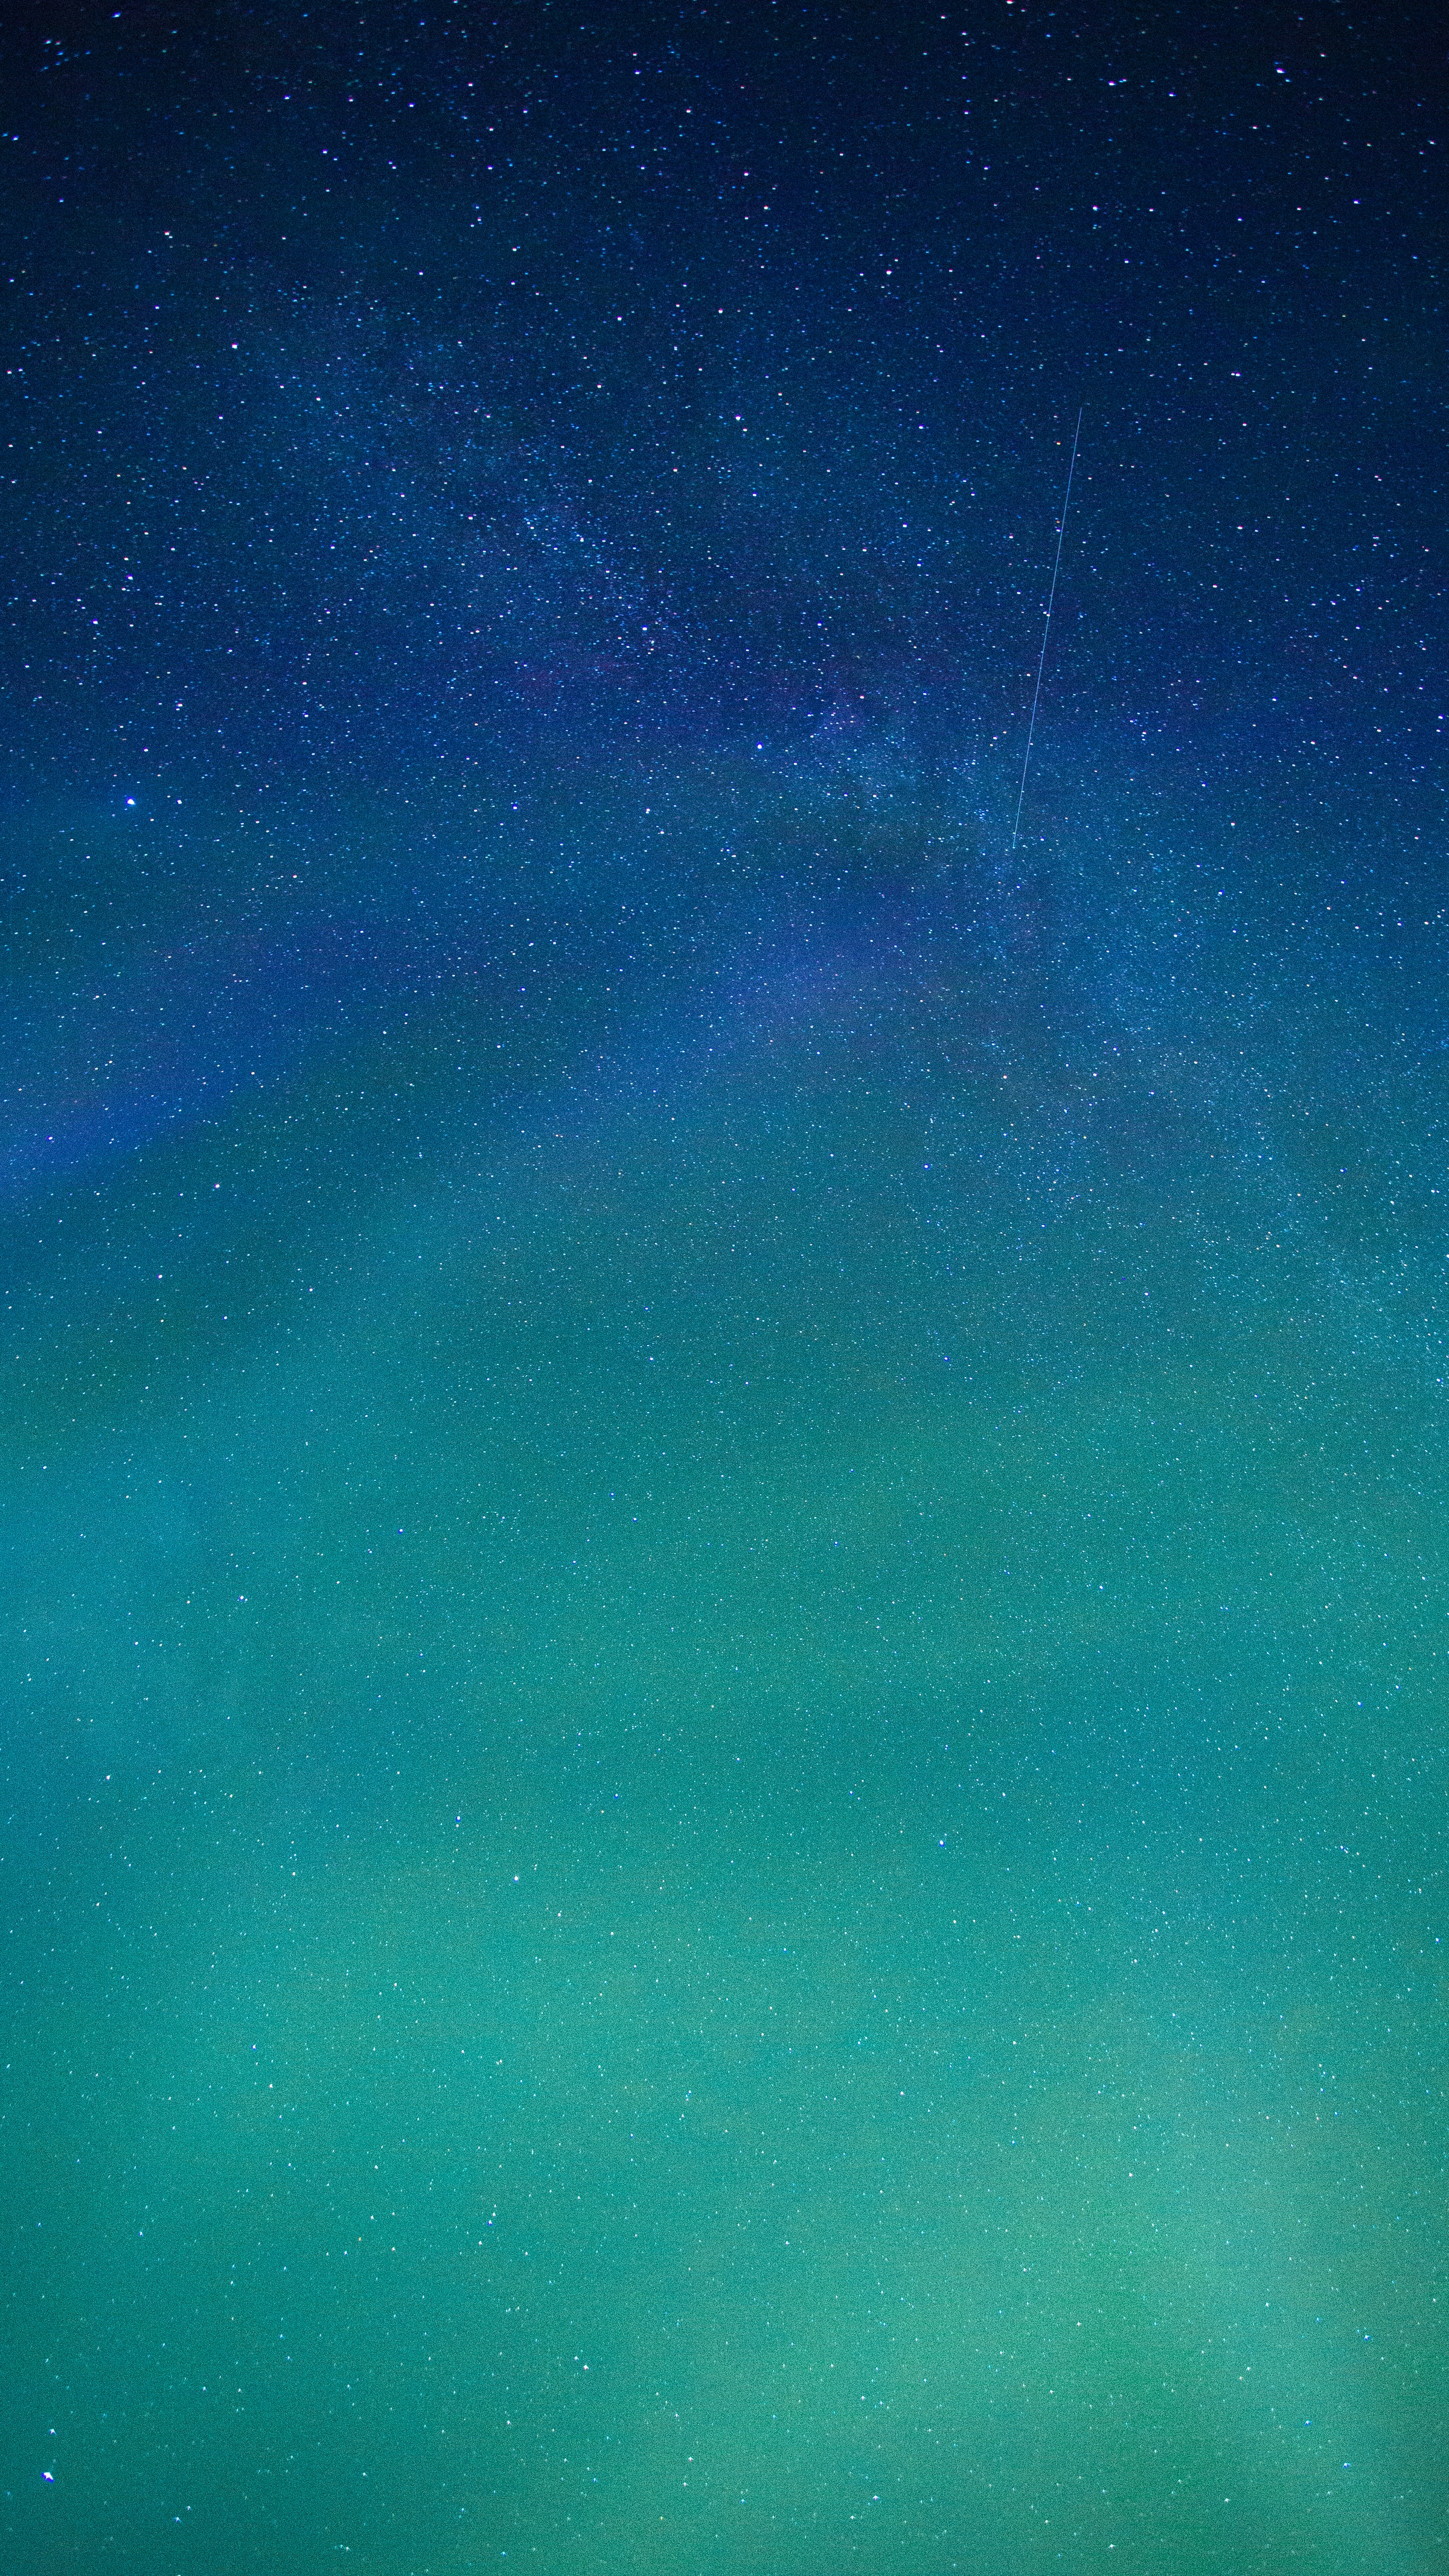 63660 free wallpaper 2160x3840 for phone, download images gradient, stars, starfall, universe 2160x3840 for mobile